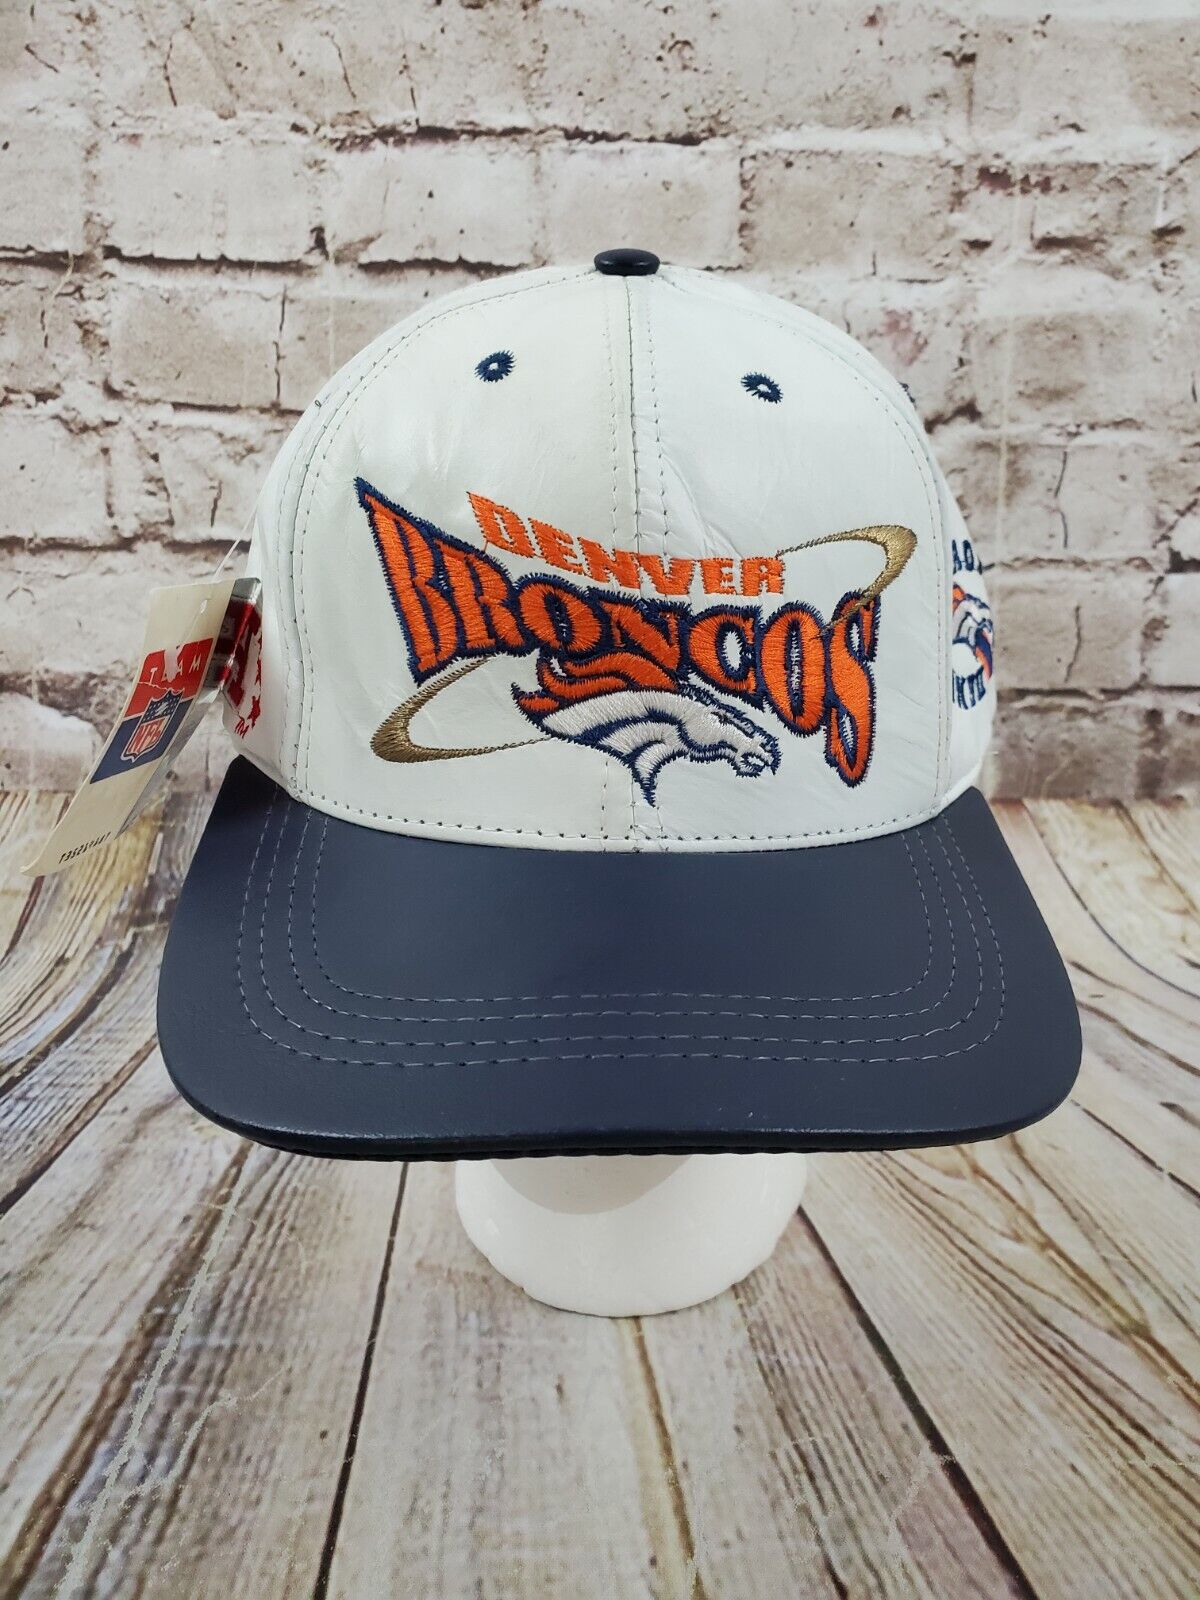 Denver Broncos Leather Hat Baseball Cap Embroidered Made in USA White 